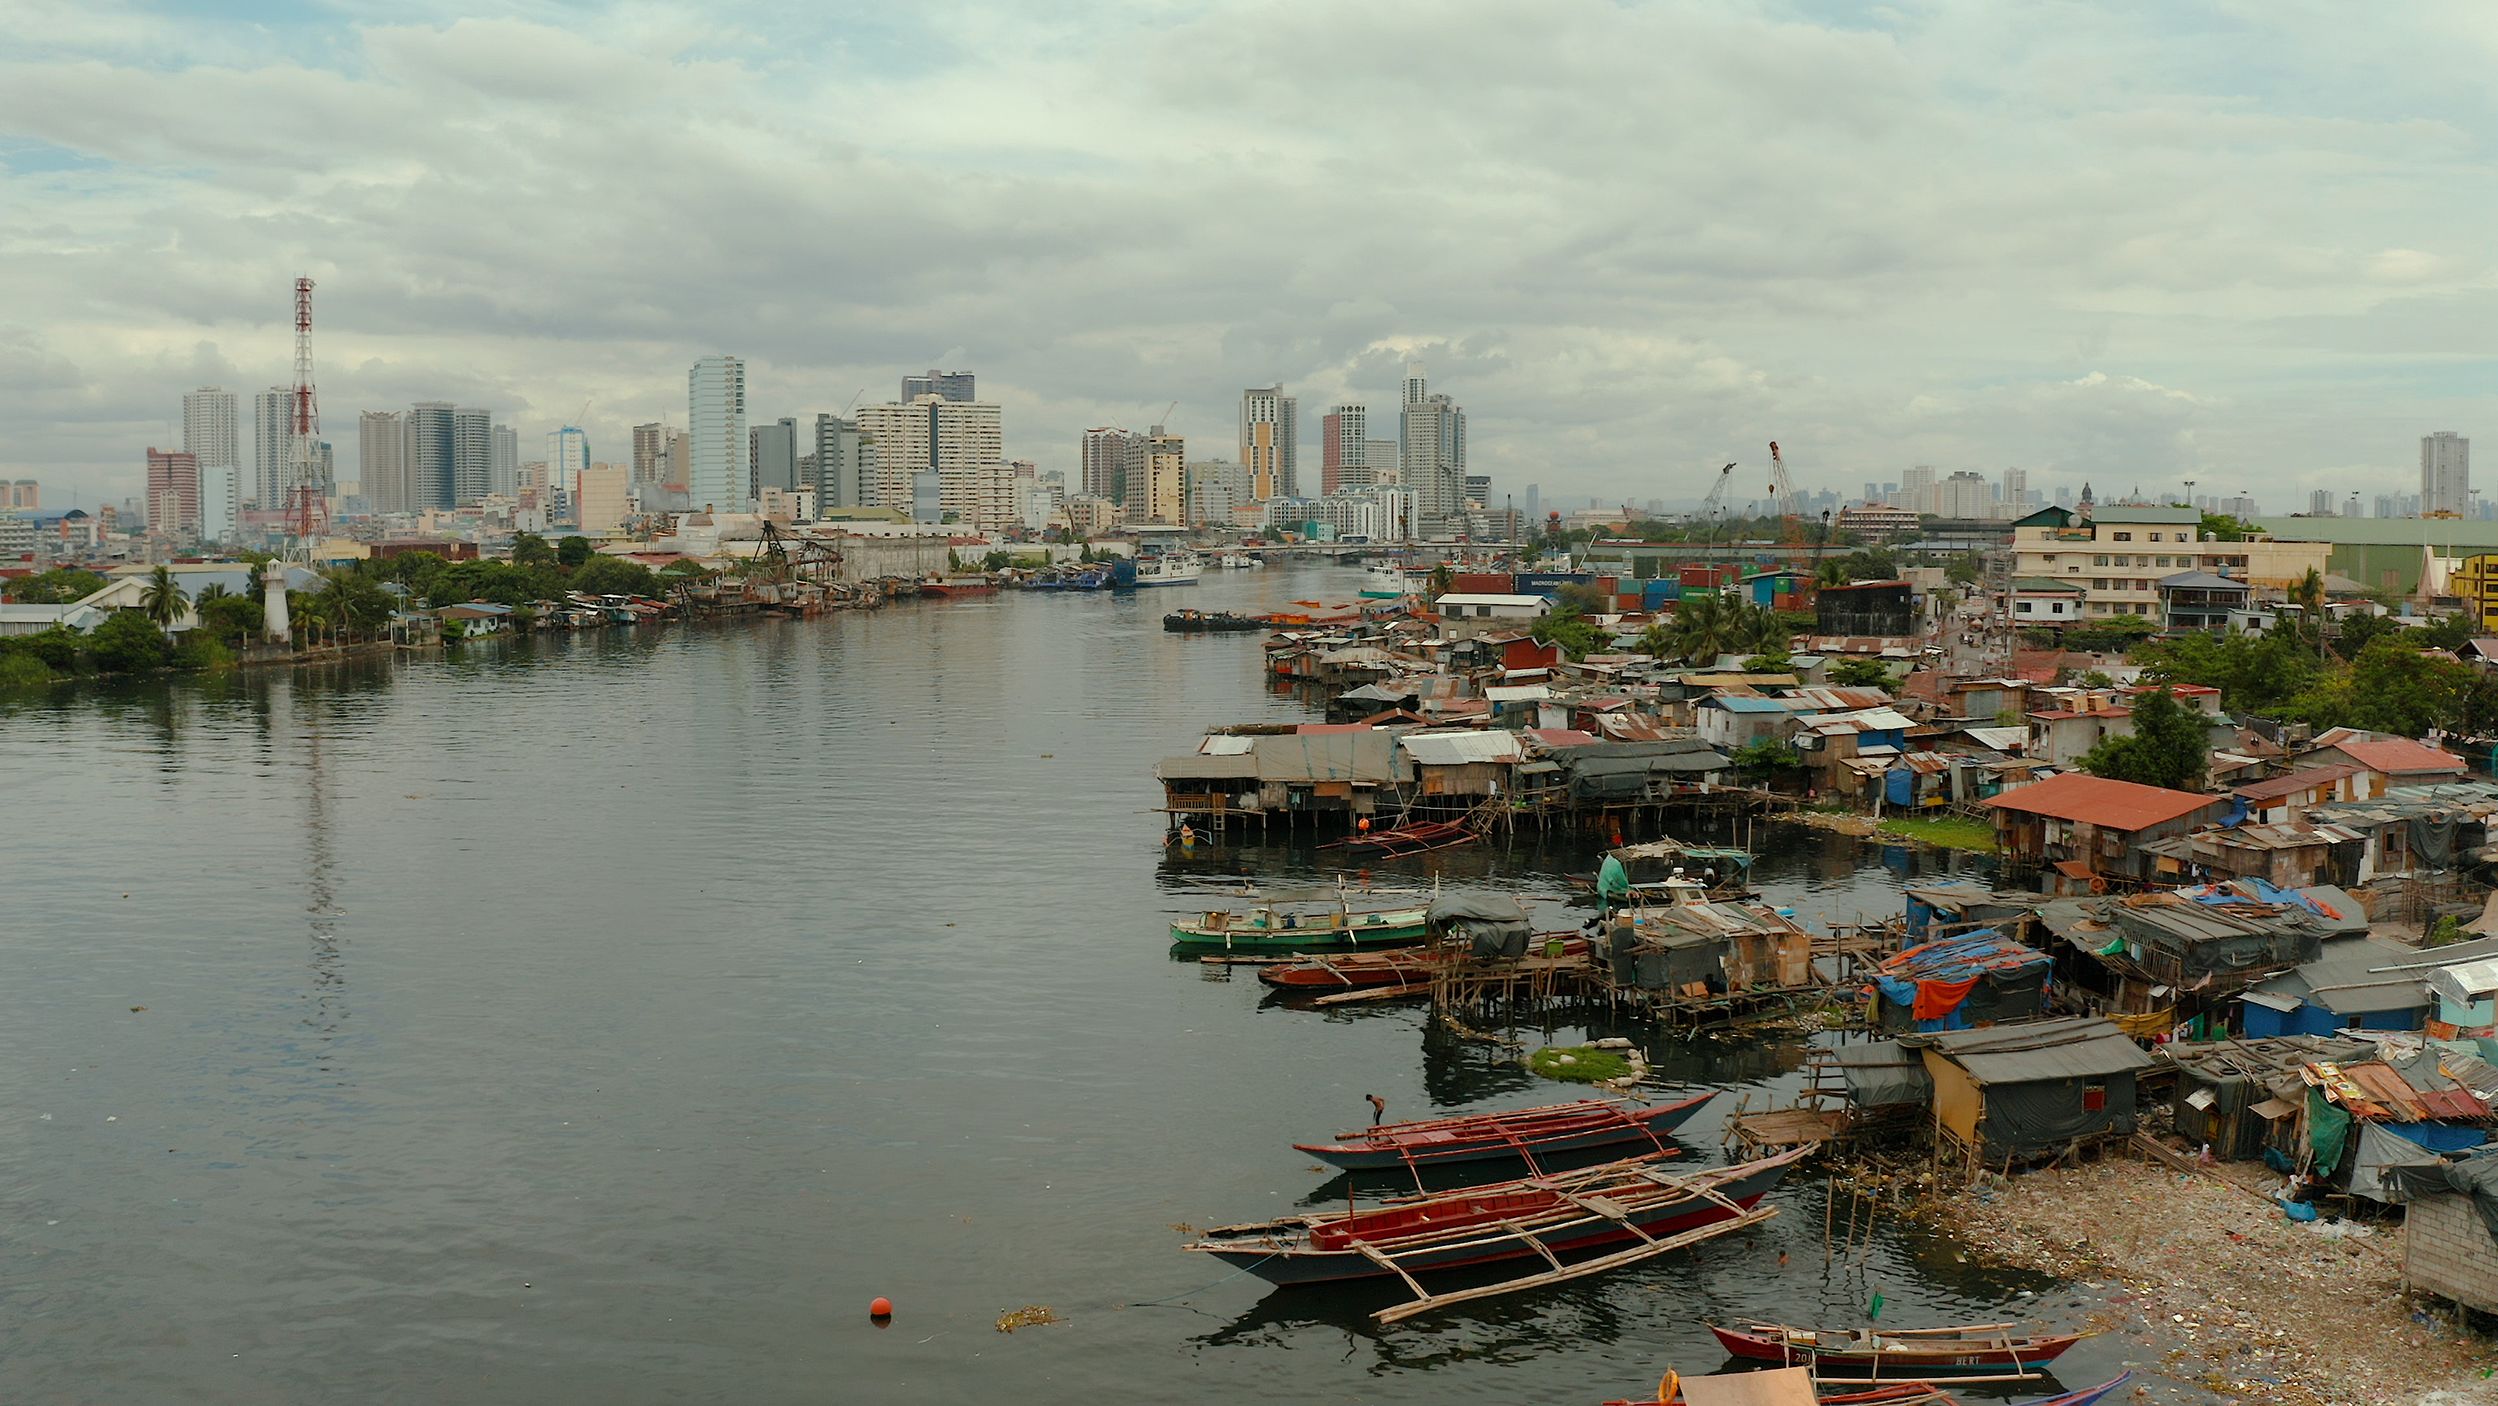 Manila, the sprawling capital of the Philippines where millions live in slums against the backdrop of modern skyscrapers